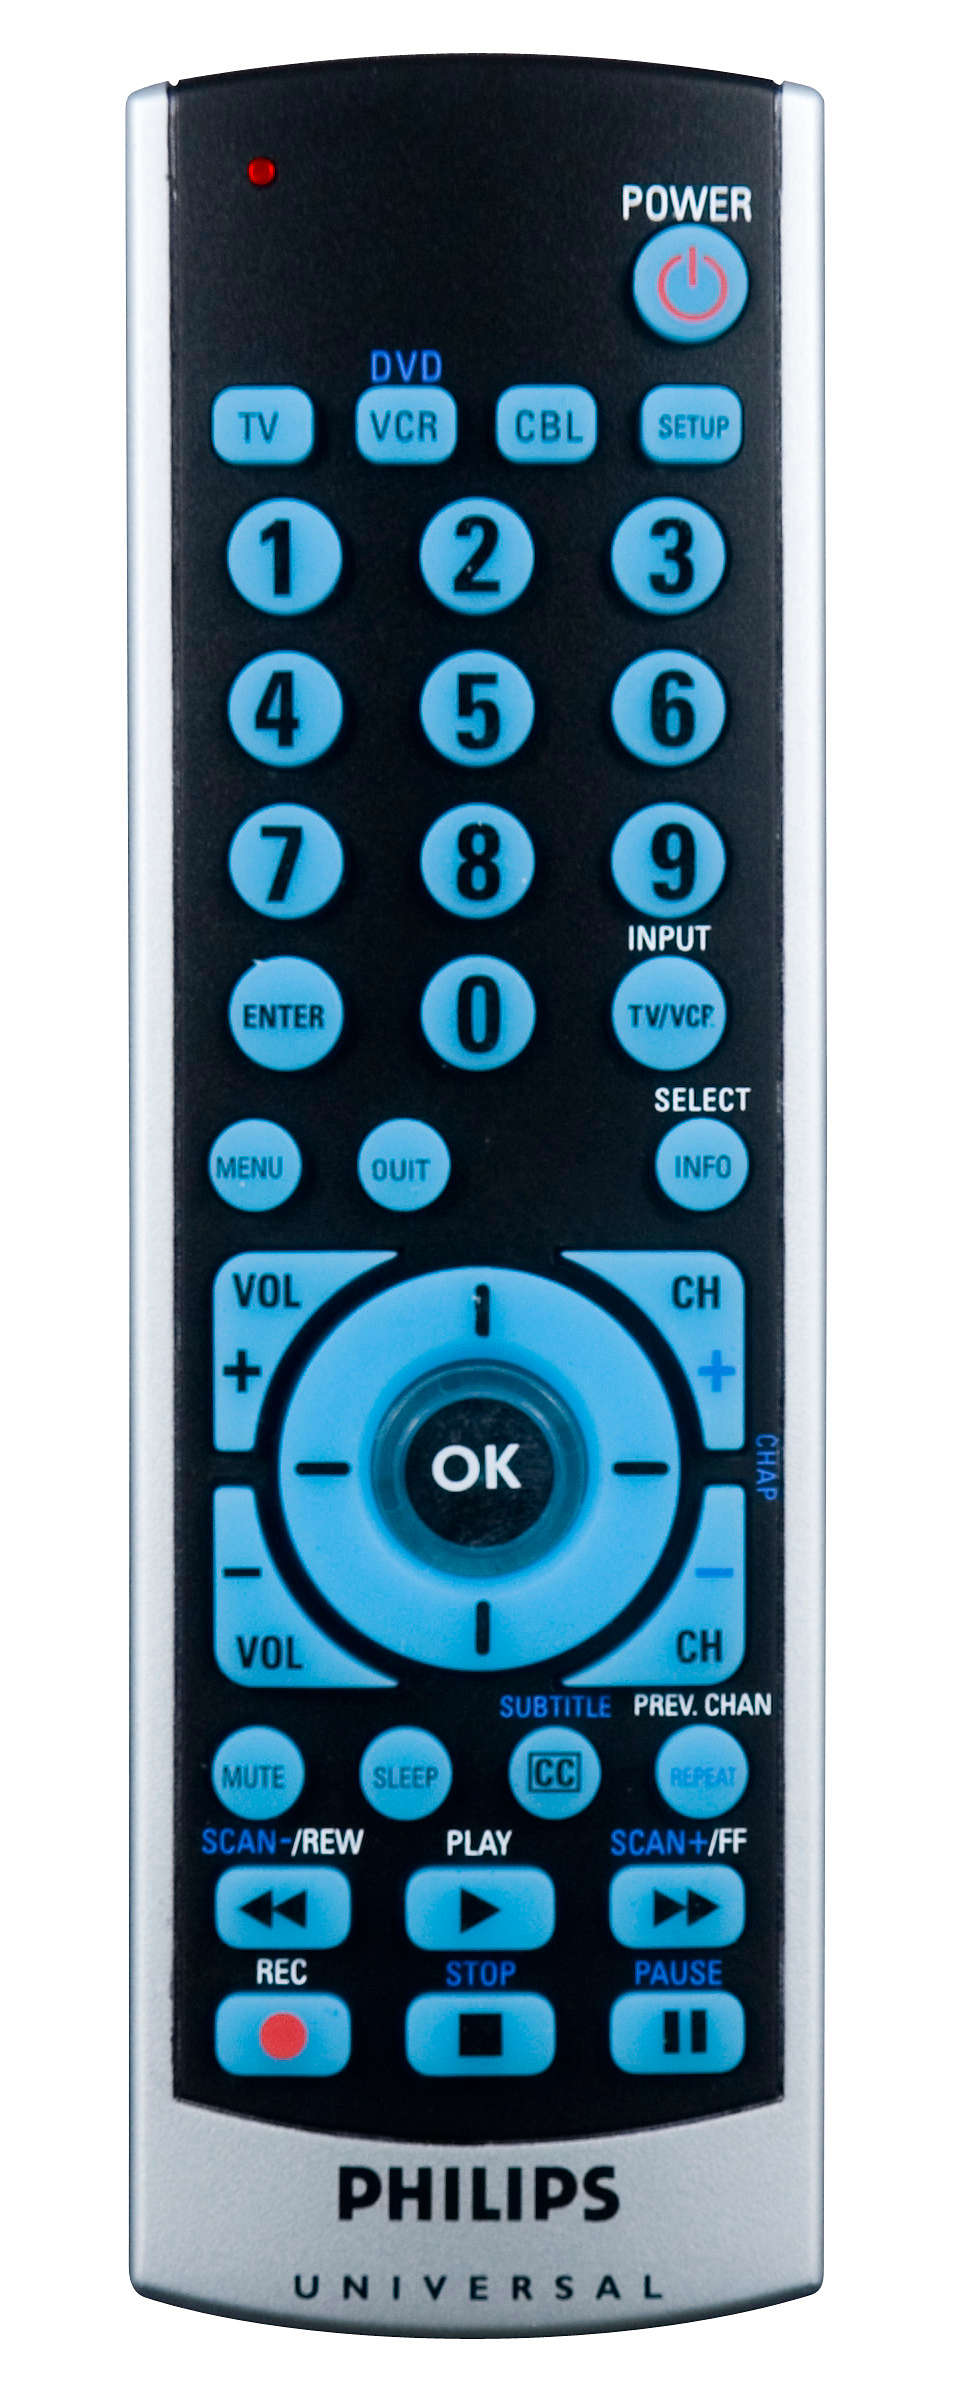 Ideal replacement remote